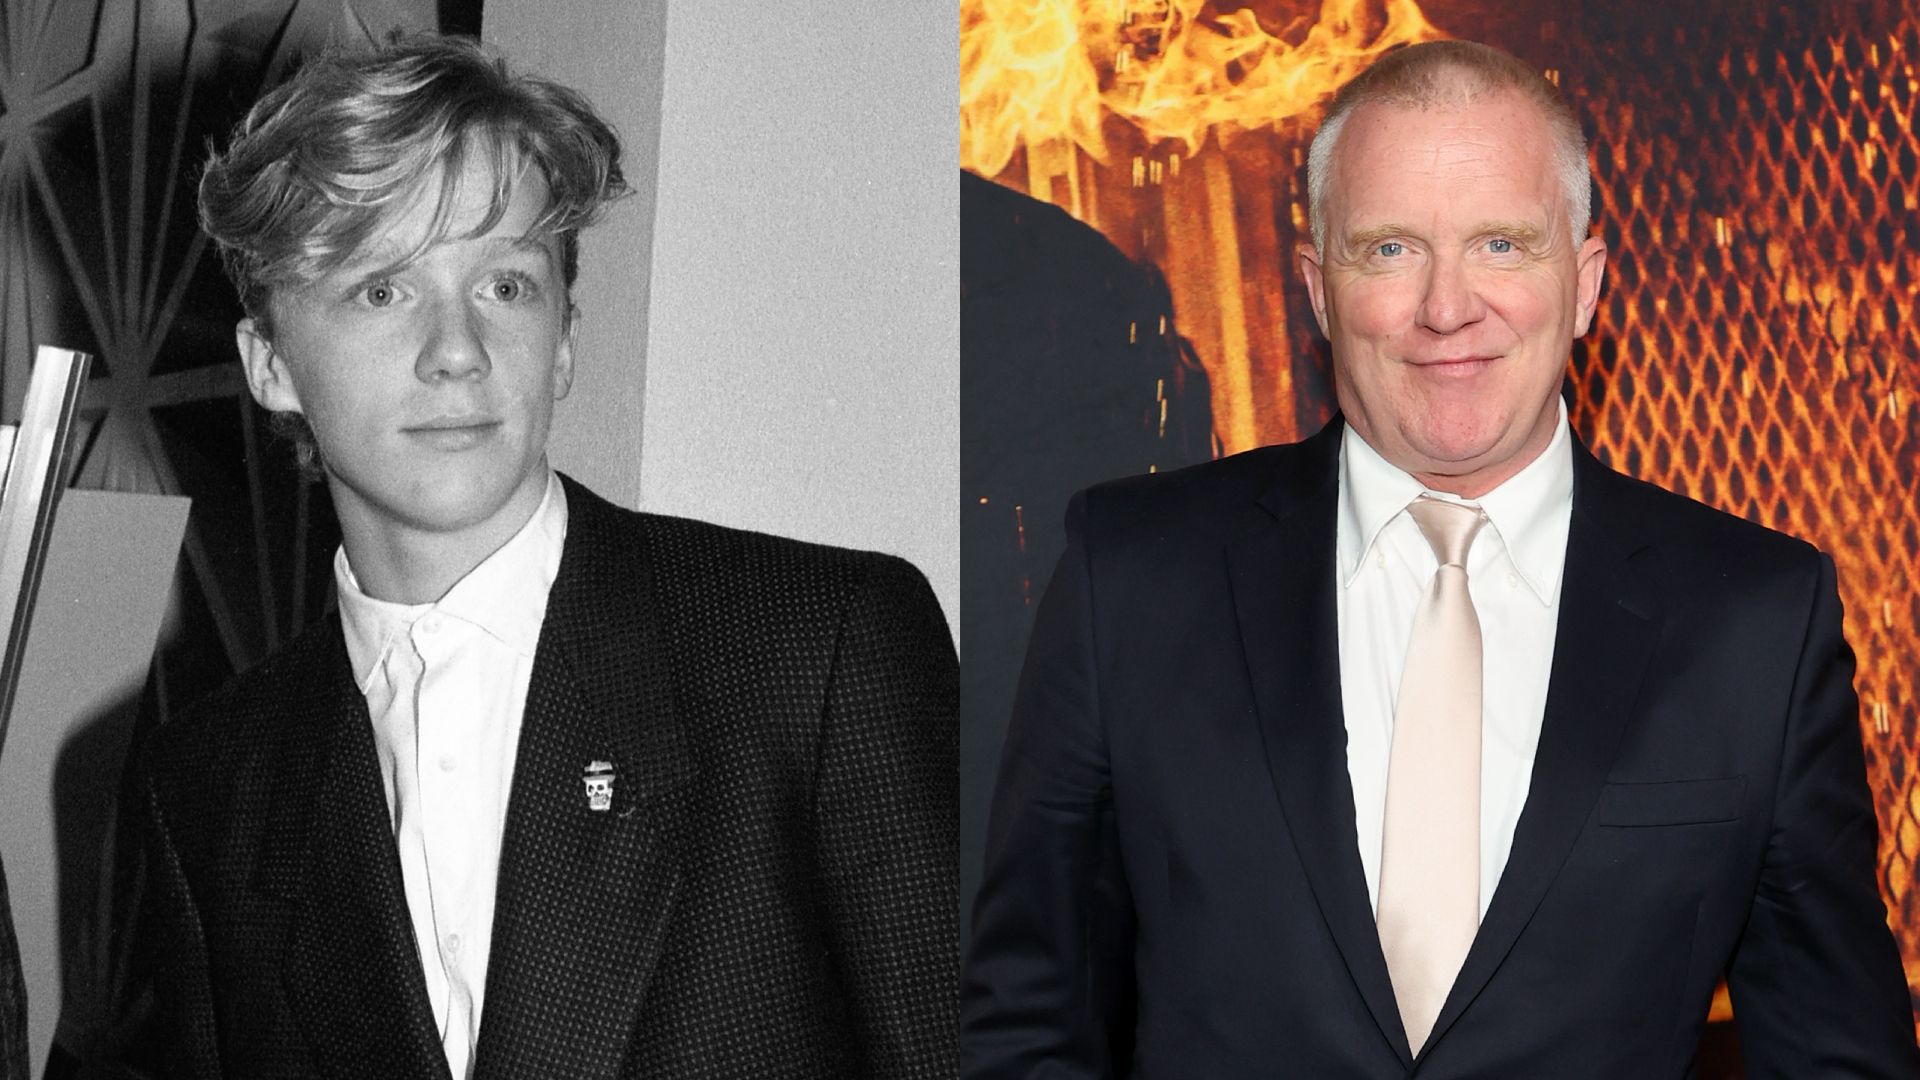 The split image of Anthony Michael Hall in 1985 vs. today